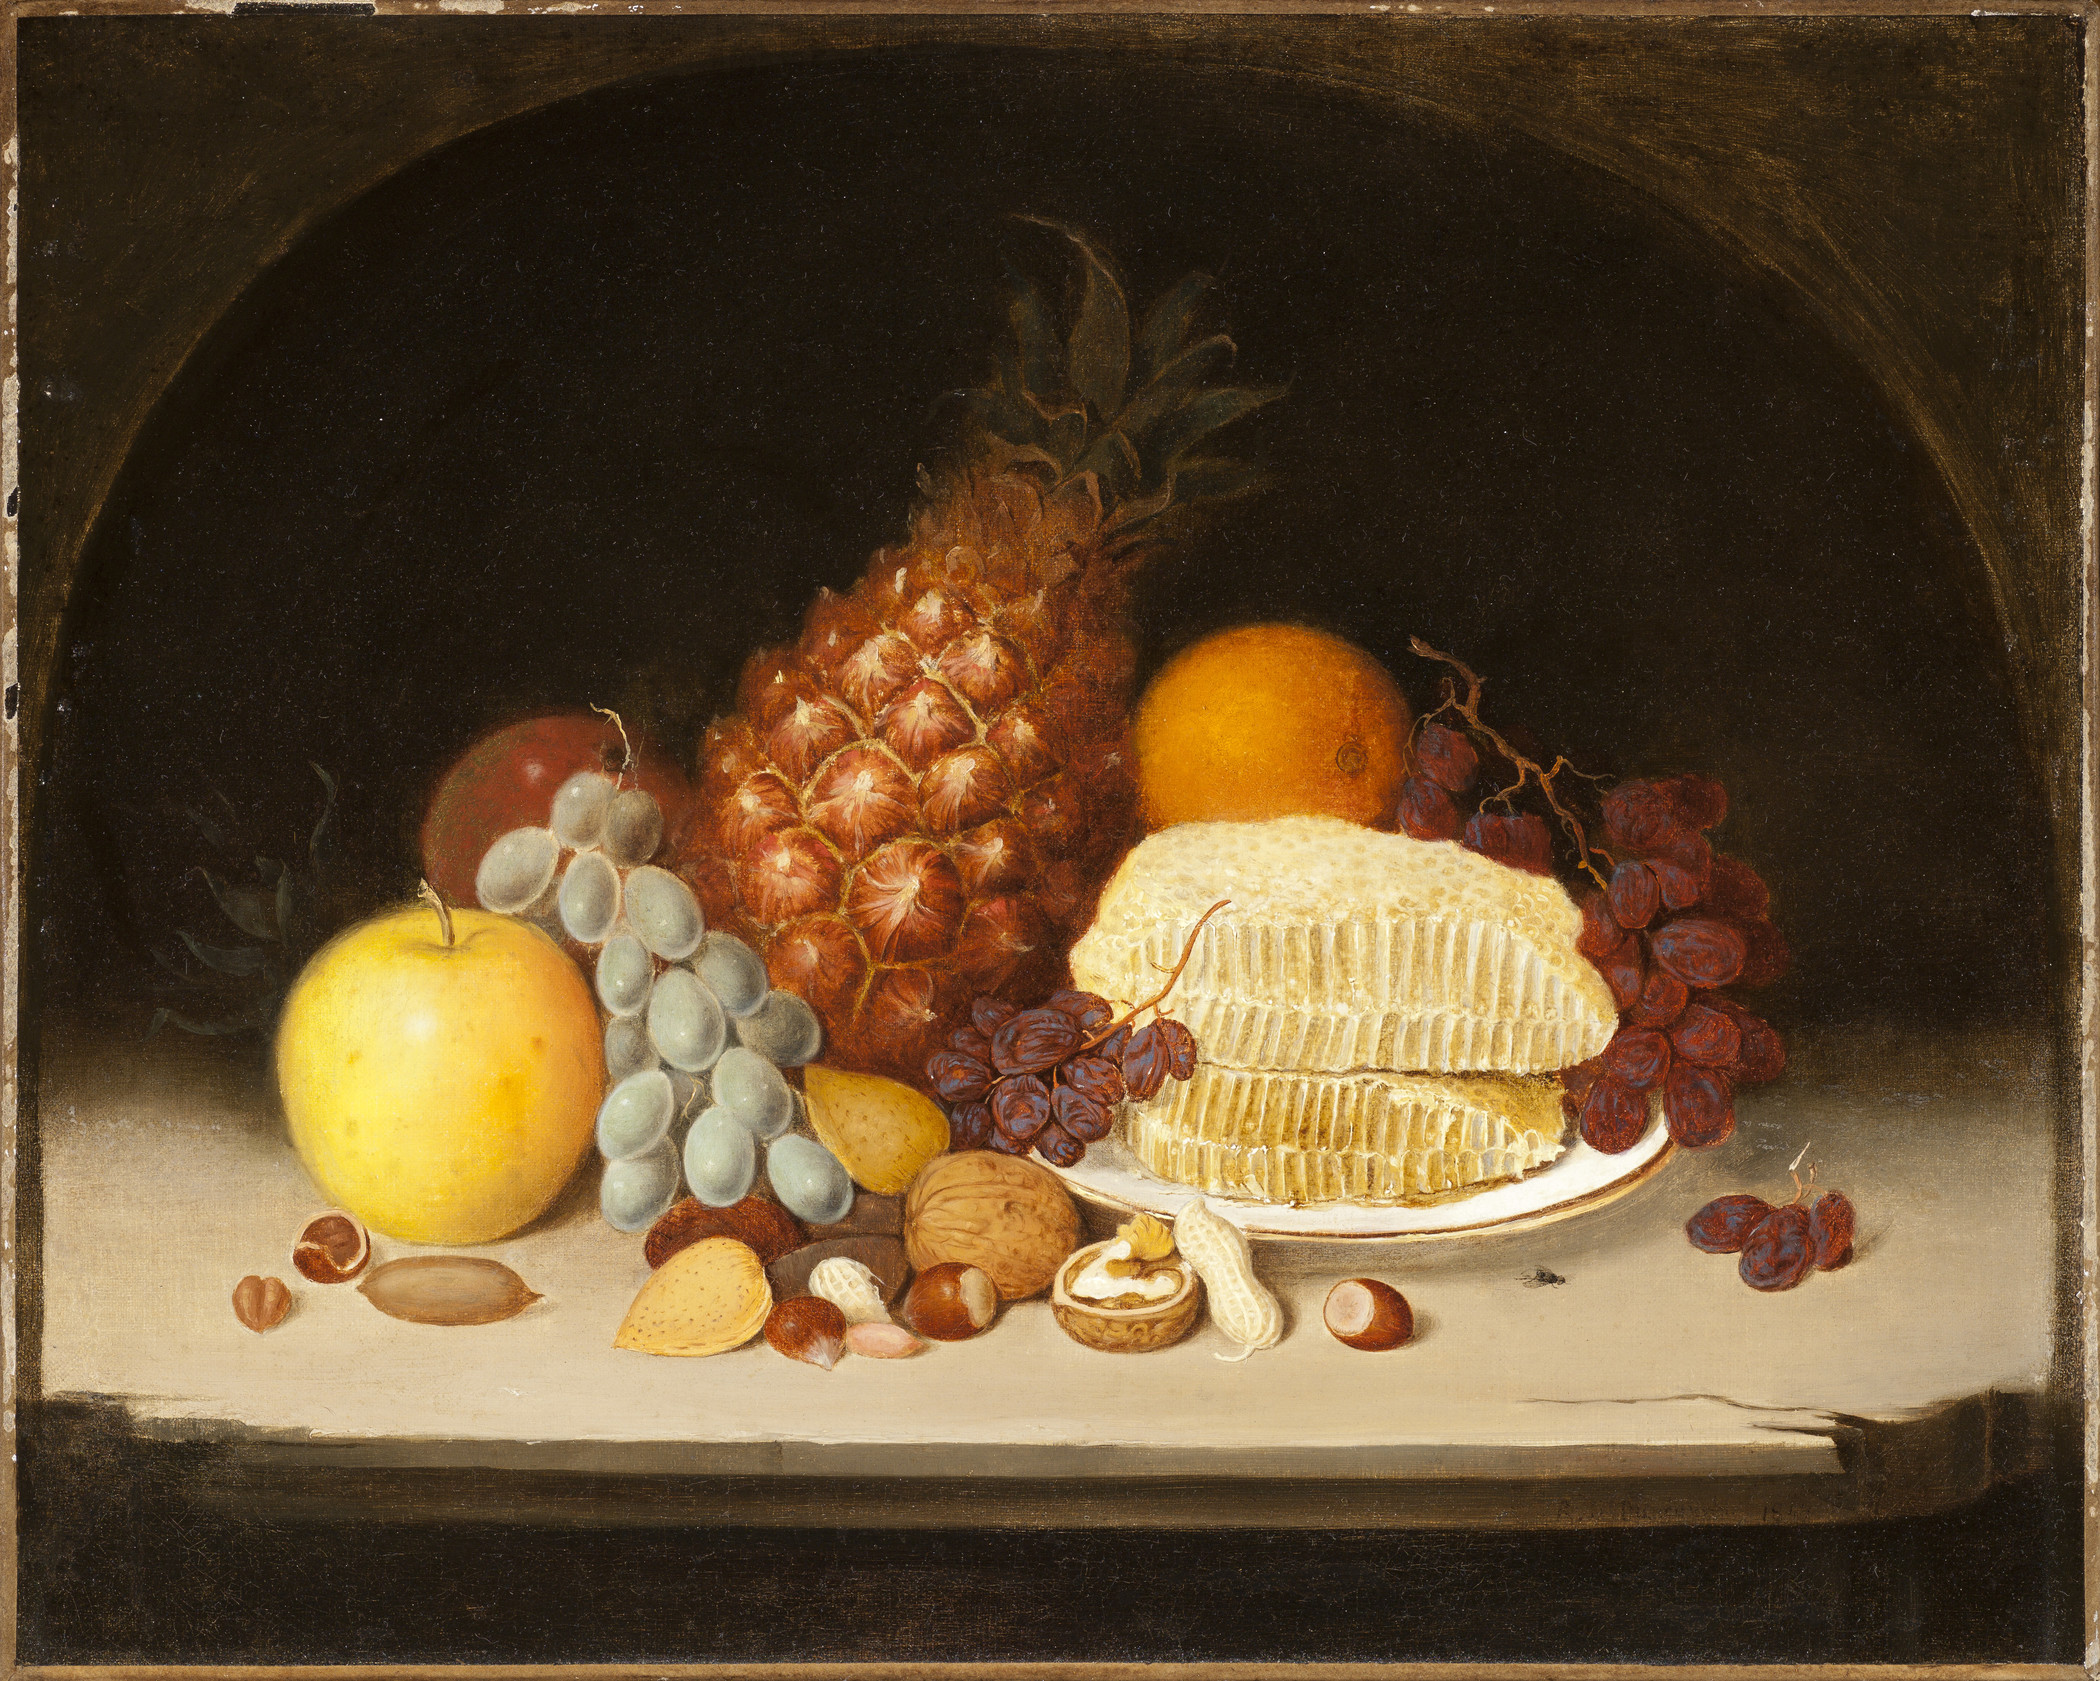 Still-Life by Robert Duncanson - 1849 - 41 x 51.28 cm LACMA, Los Angeles County Museum of Art